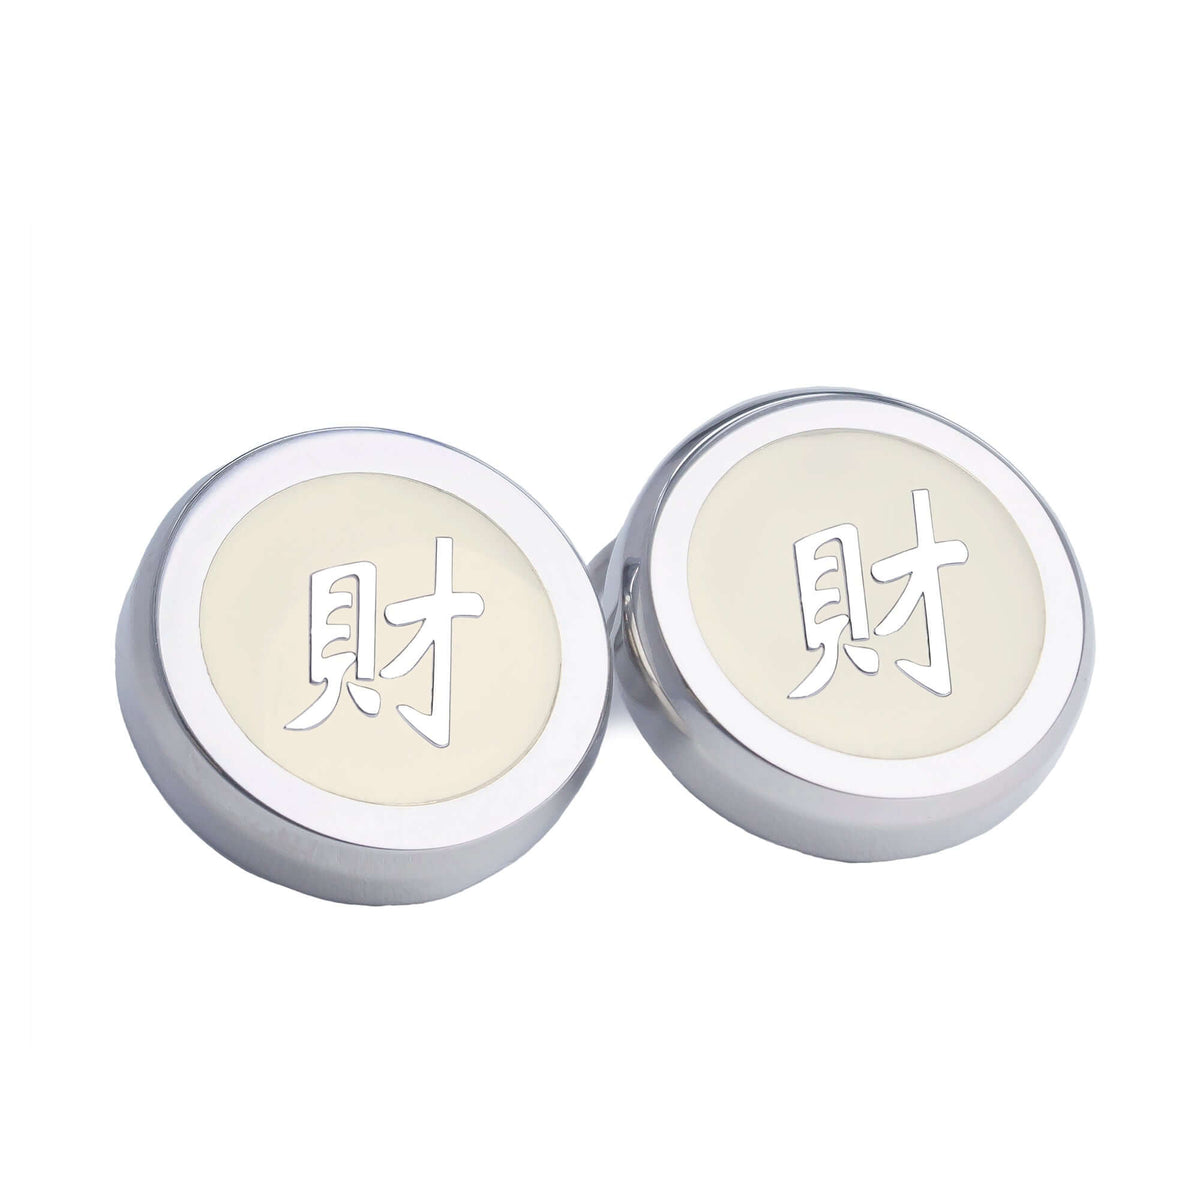 Chinese Character Silver Button Covers-Button Covers-A.Azthom-財 Cai-Cufflinks.com.sg